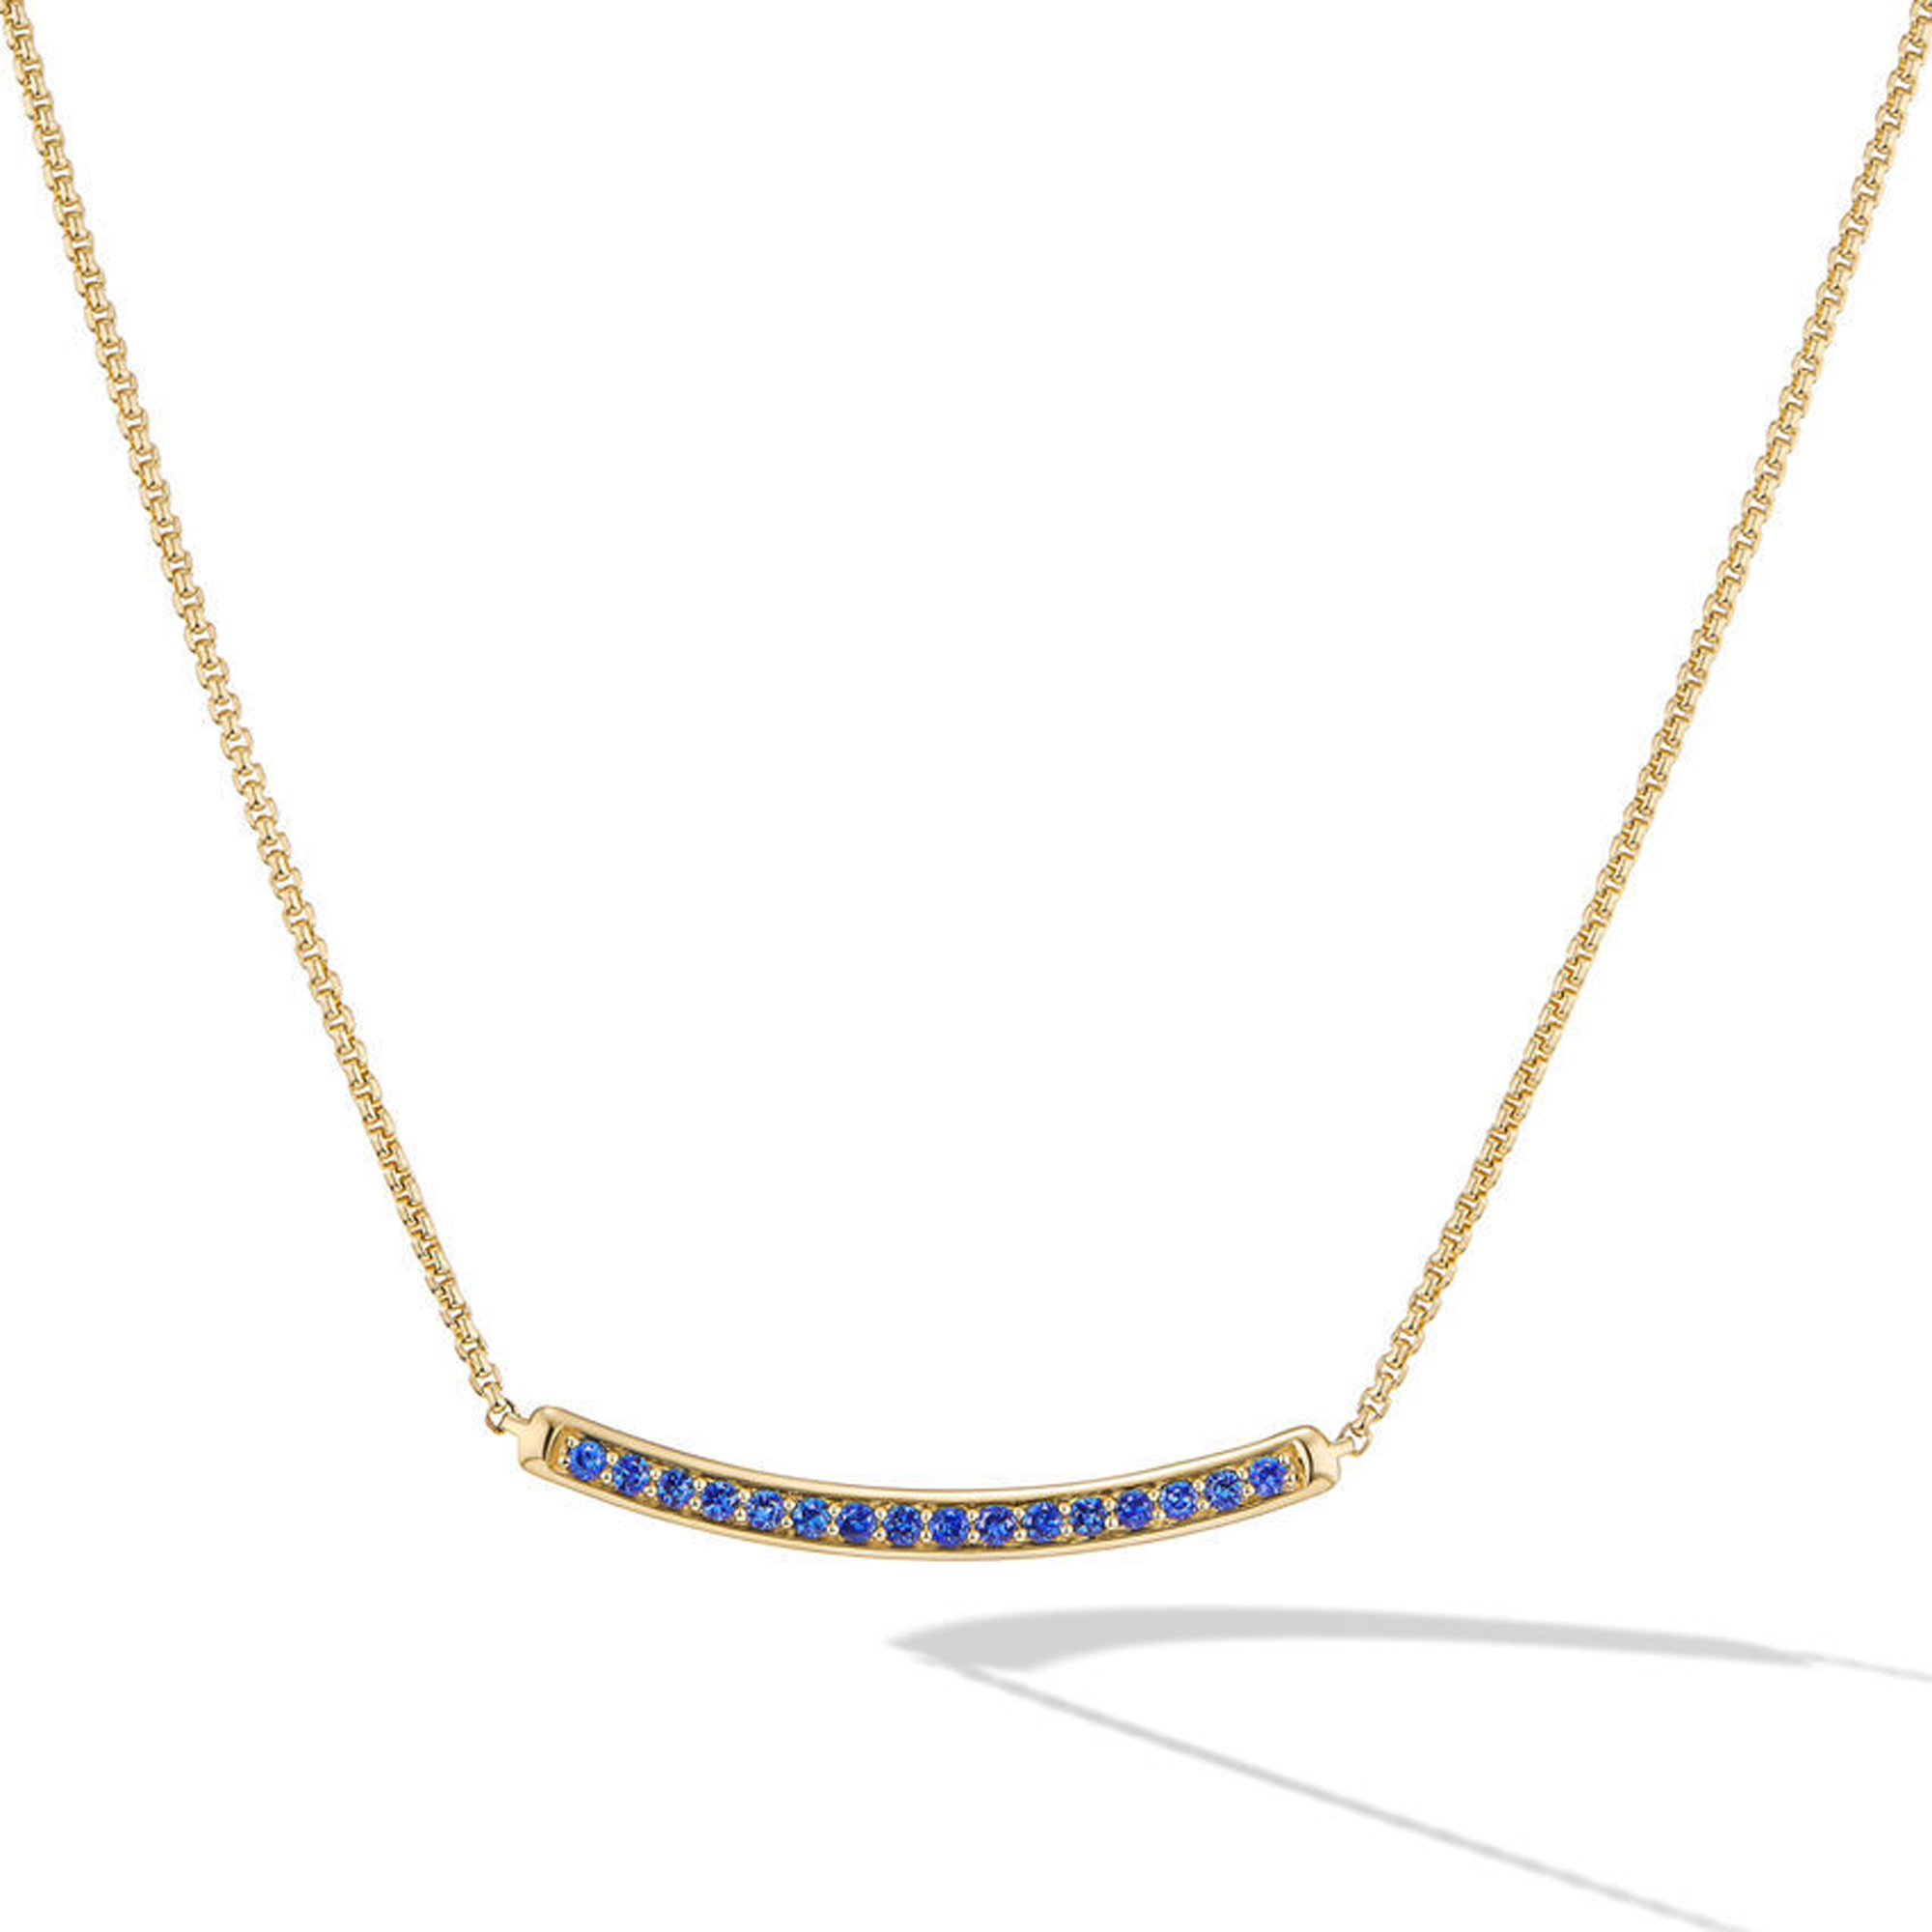 David Yurman Petite Pave Bar Necklace in 18K Yellow Gold with Blue Sapphires 1.25mm